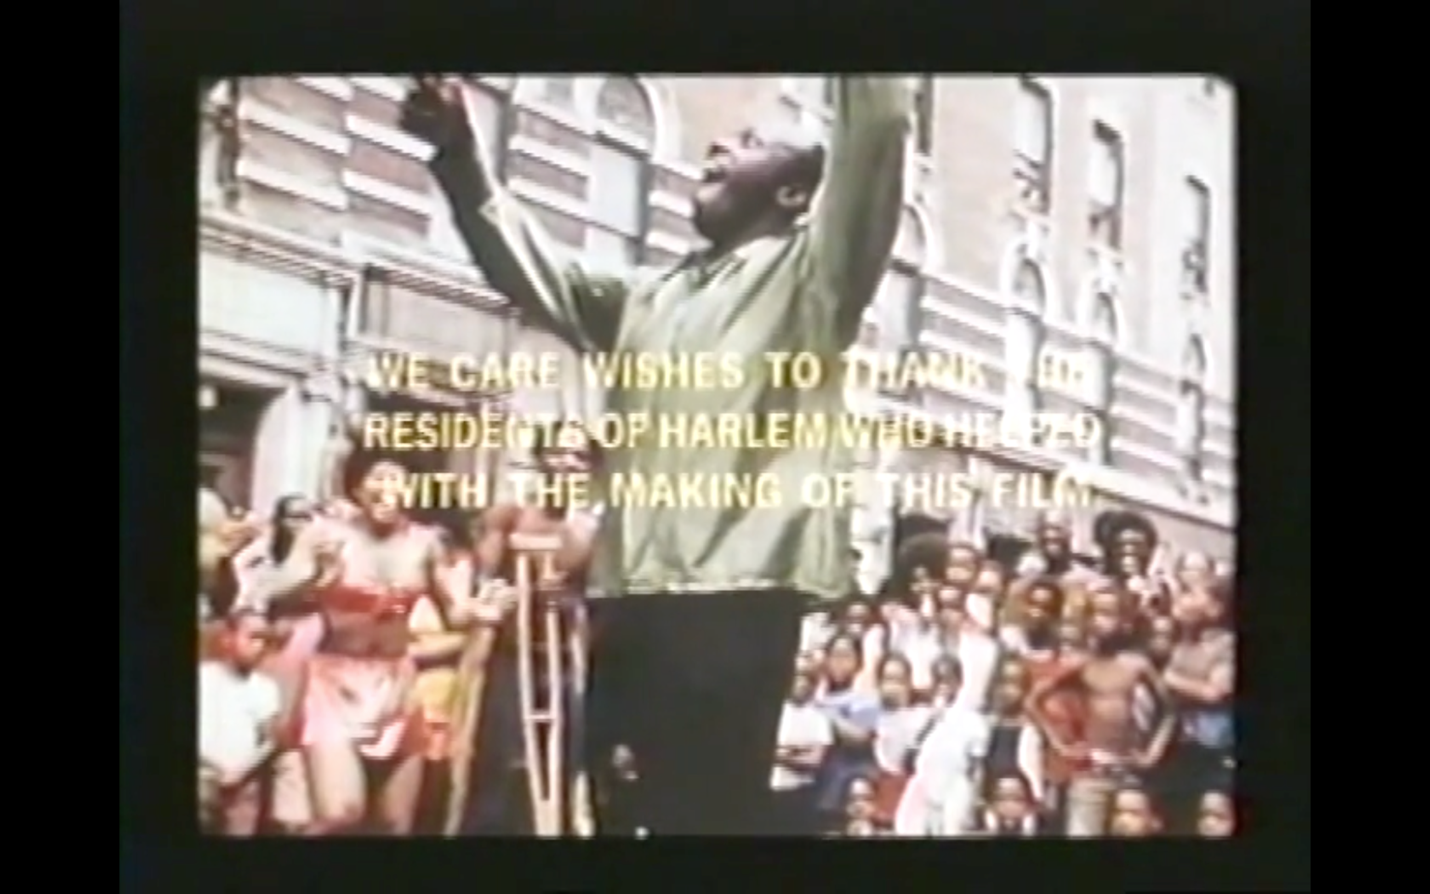 The image shows the man with one leg dancing without any crutches as the crowd continues to look on, many with smiles on their faces. One of the dancers behind him is holding his crutches. Another dancer is clapping joyously. Over this scene appears these words: We Care wishes to thank the residents of Harlem who help with the making of this film. The image is used with permission of Oren Jacoby.